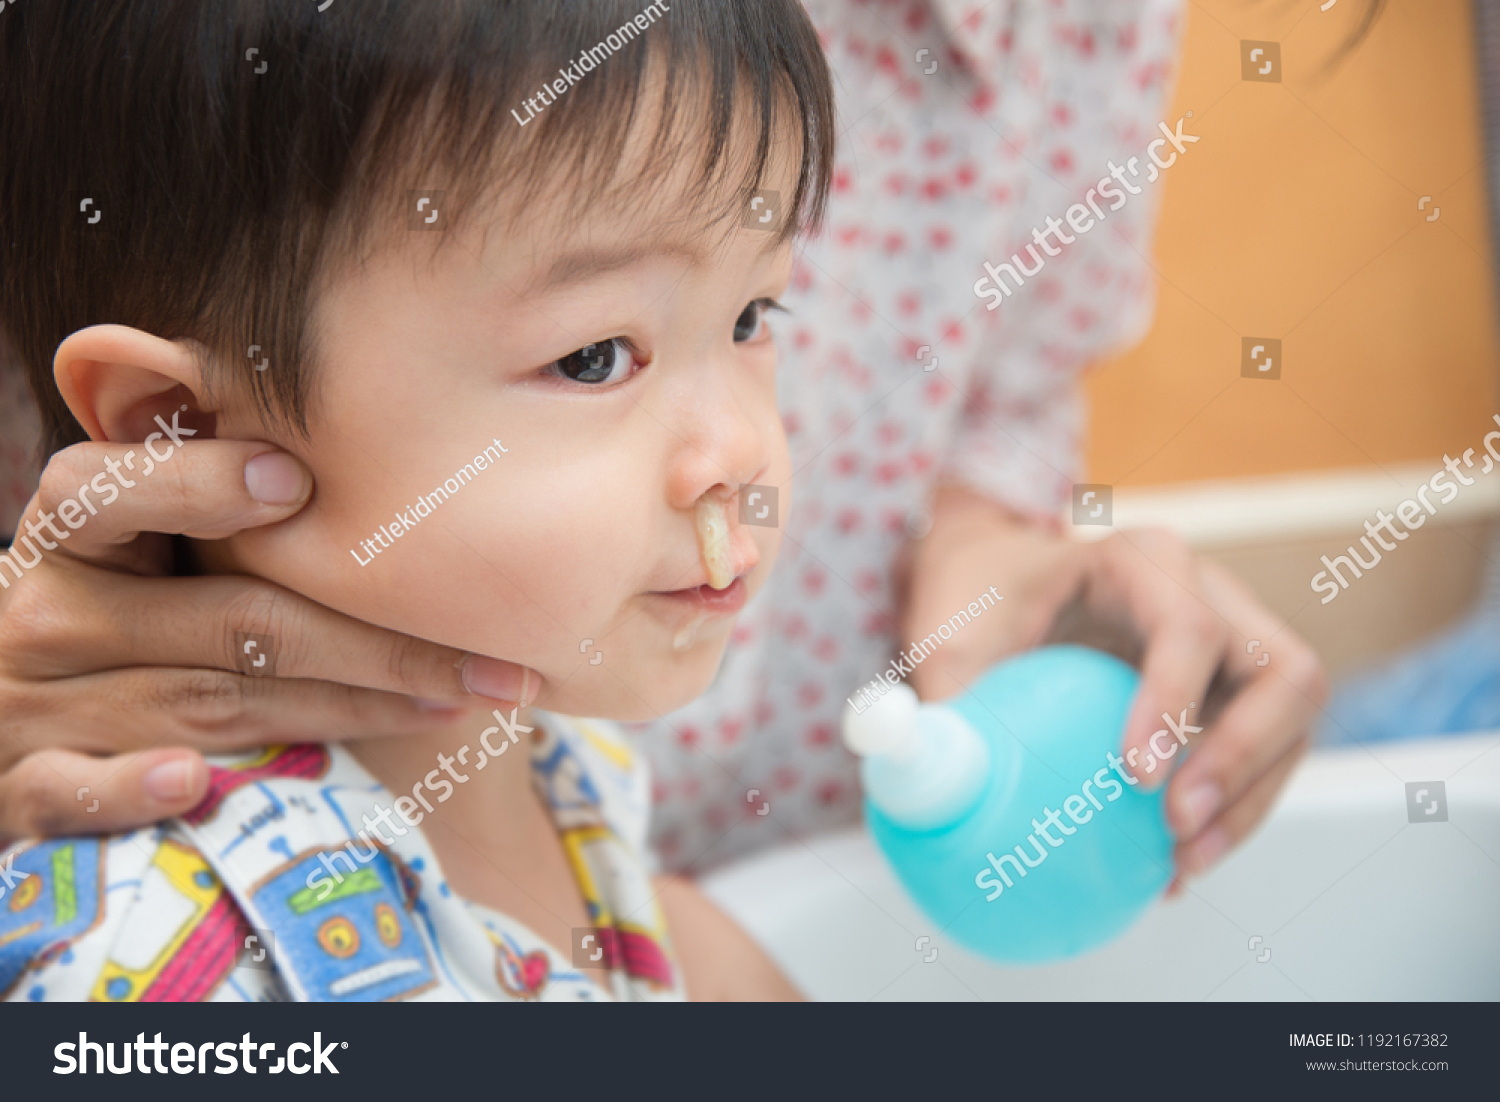 salt water for baby nose